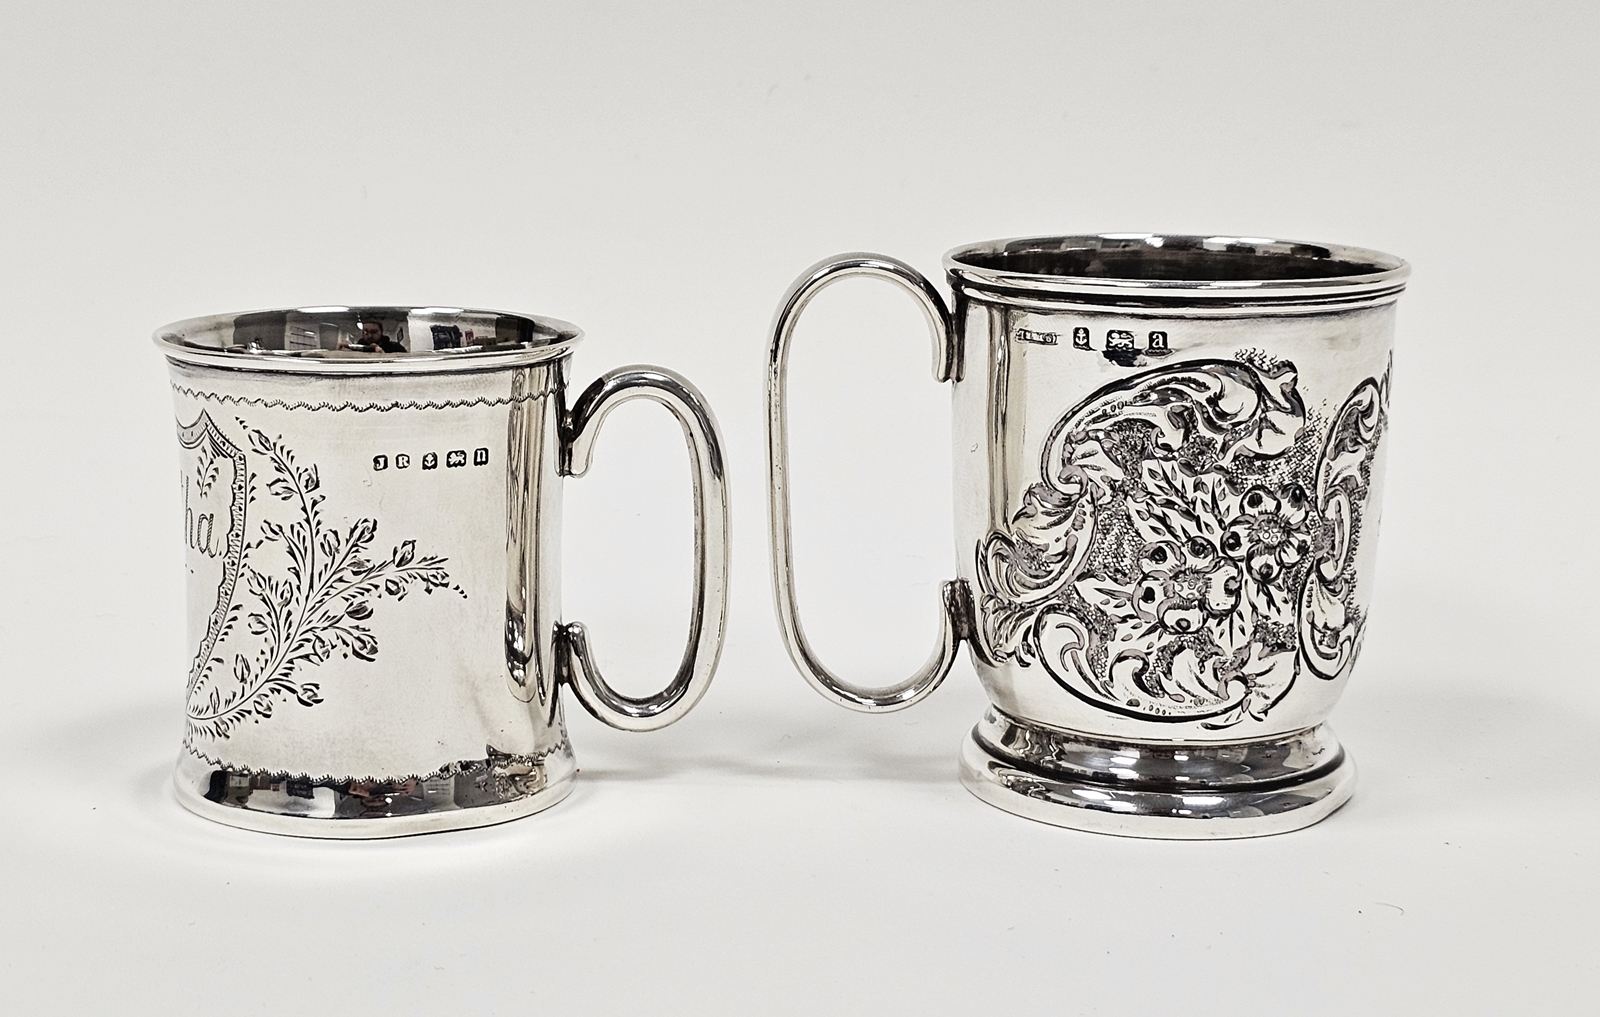 Edwardian silver christening mug by John Rose, Birmingham 1900, of cylindral form with engraved